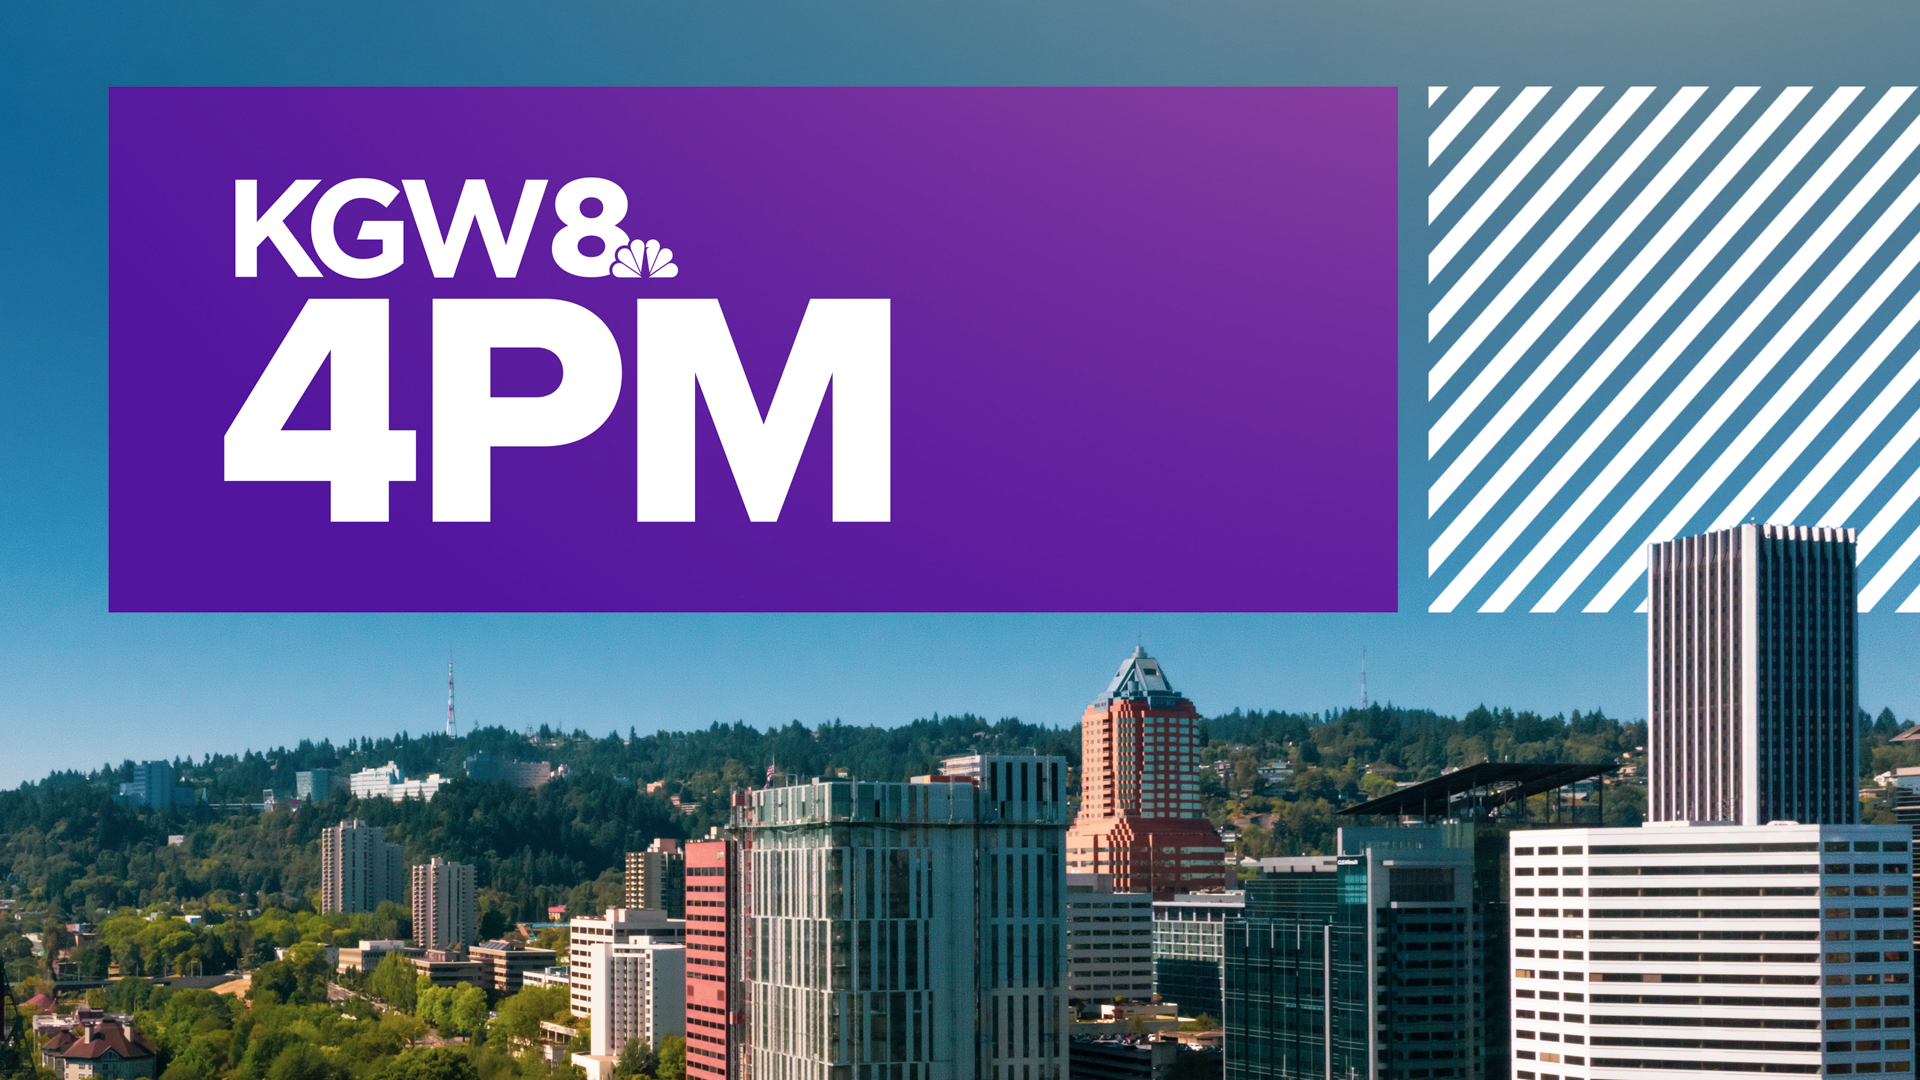 Uplifting community stories, news and weather from KGW